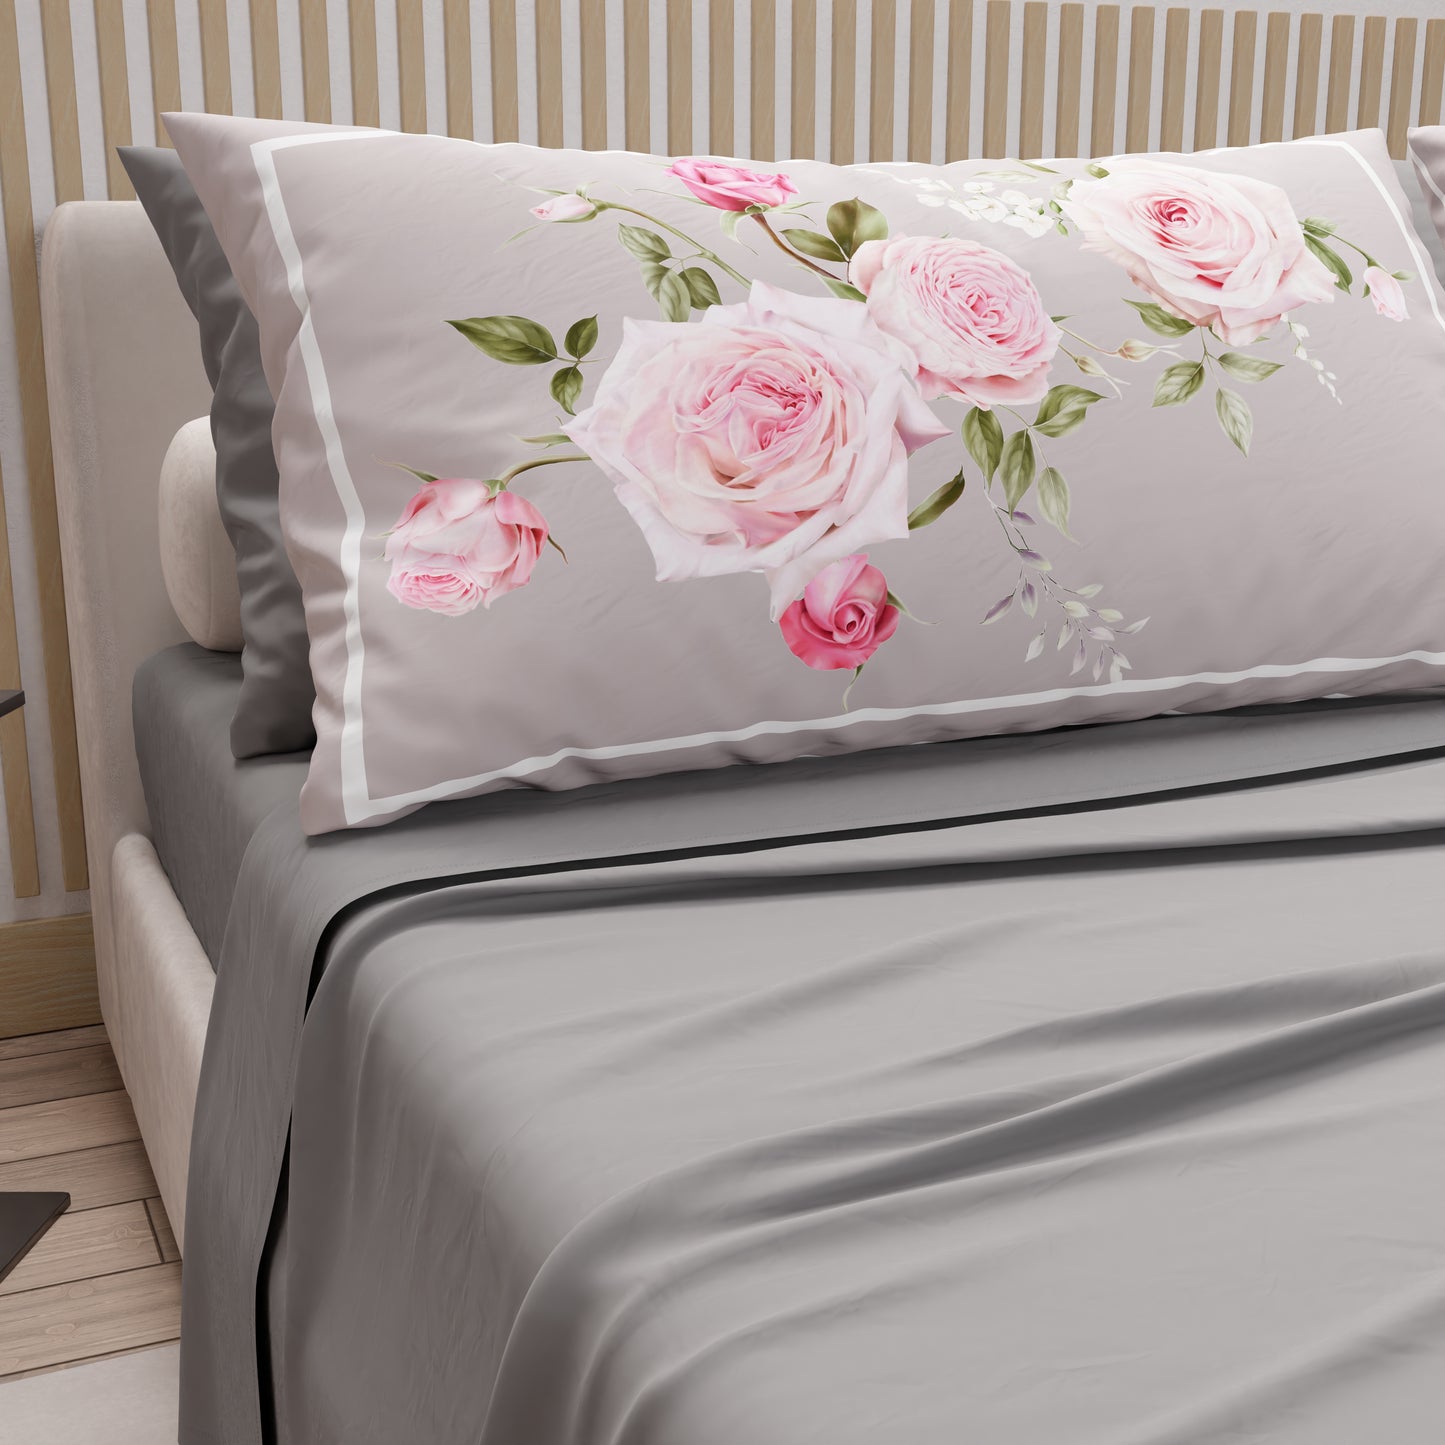 Cotton sheets, bed set with pillowcases in digital floral print 20-07